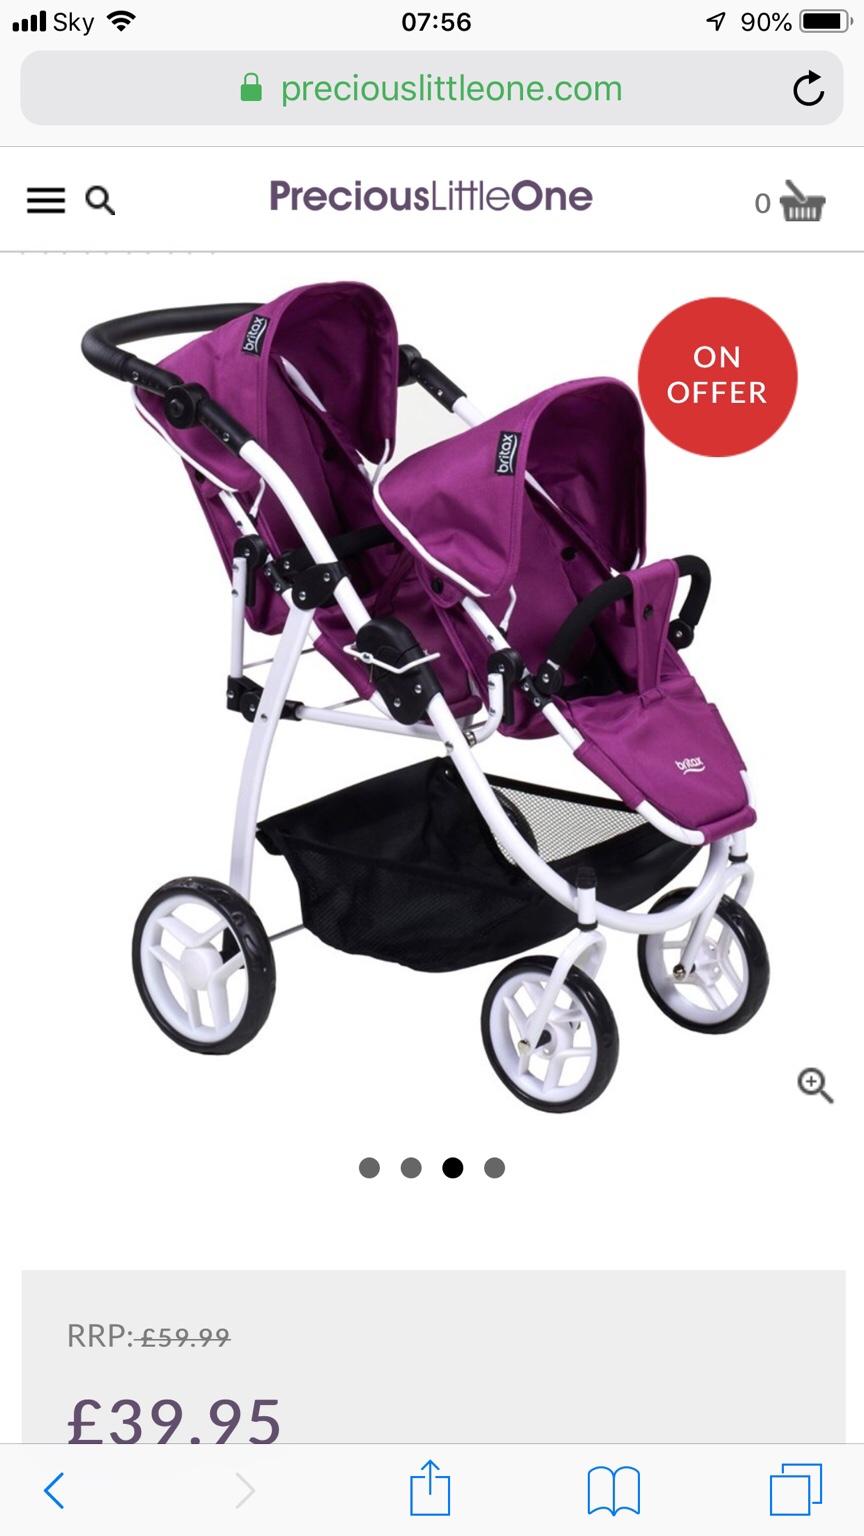 britax dolls double buggy hot pink